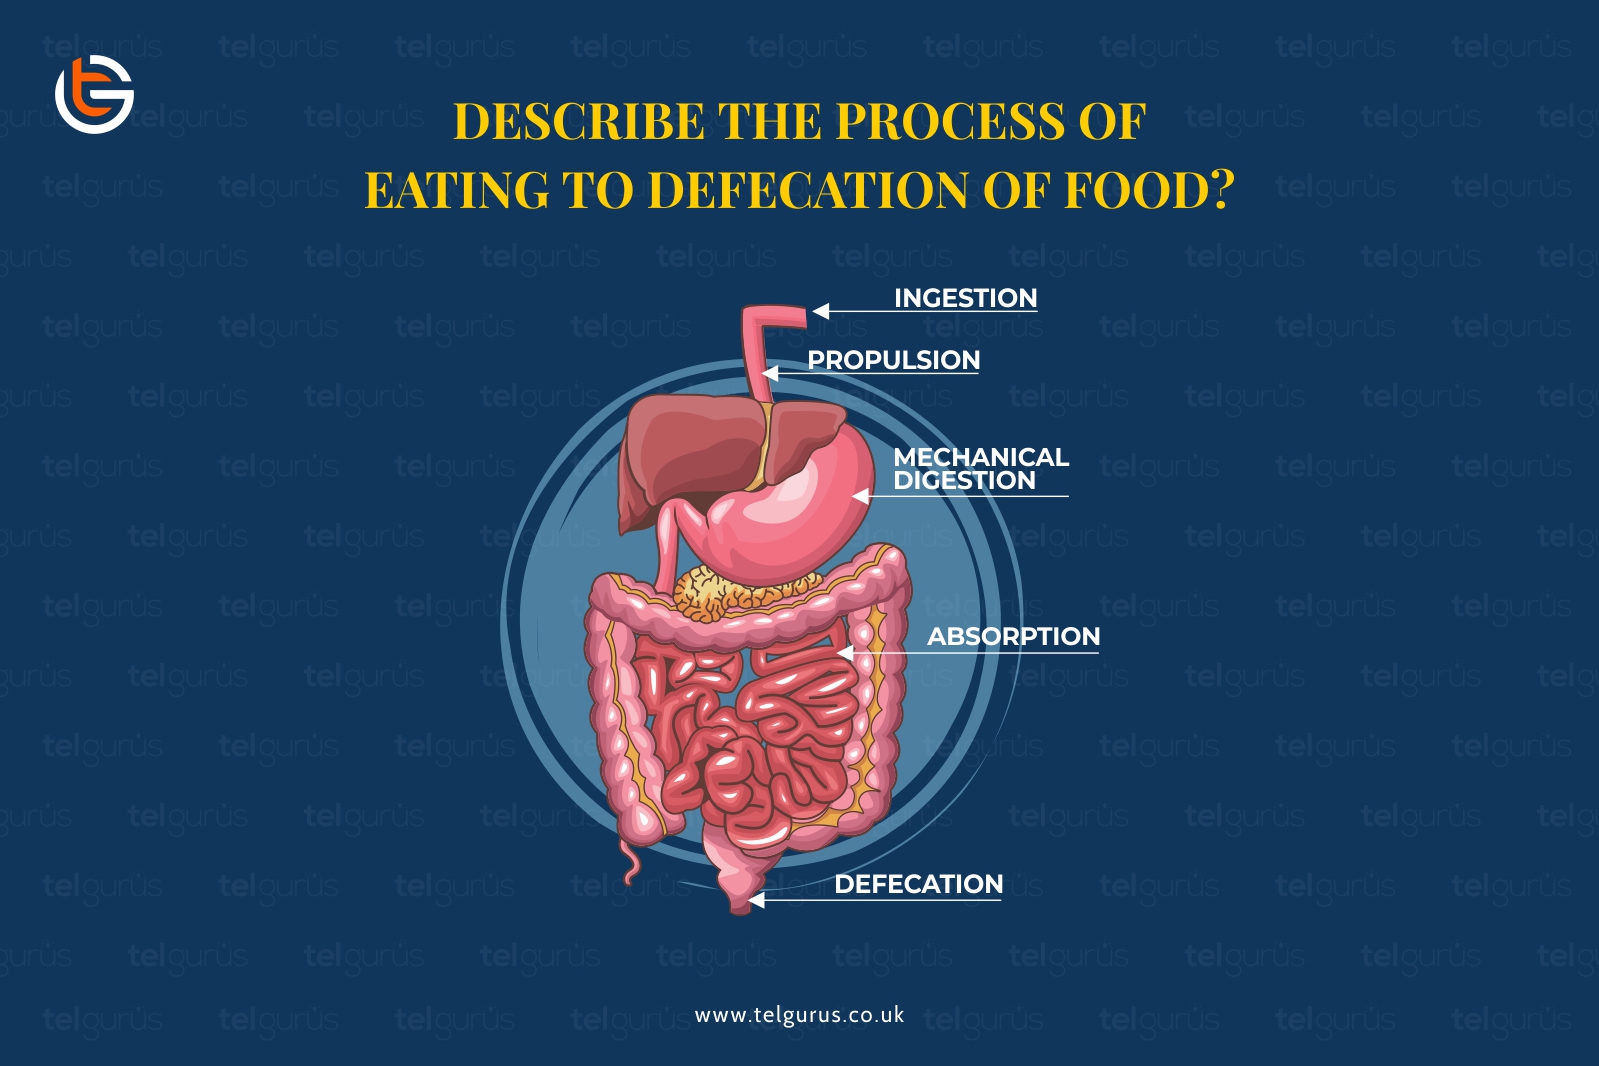 Describe the process of eating to defecation of food?